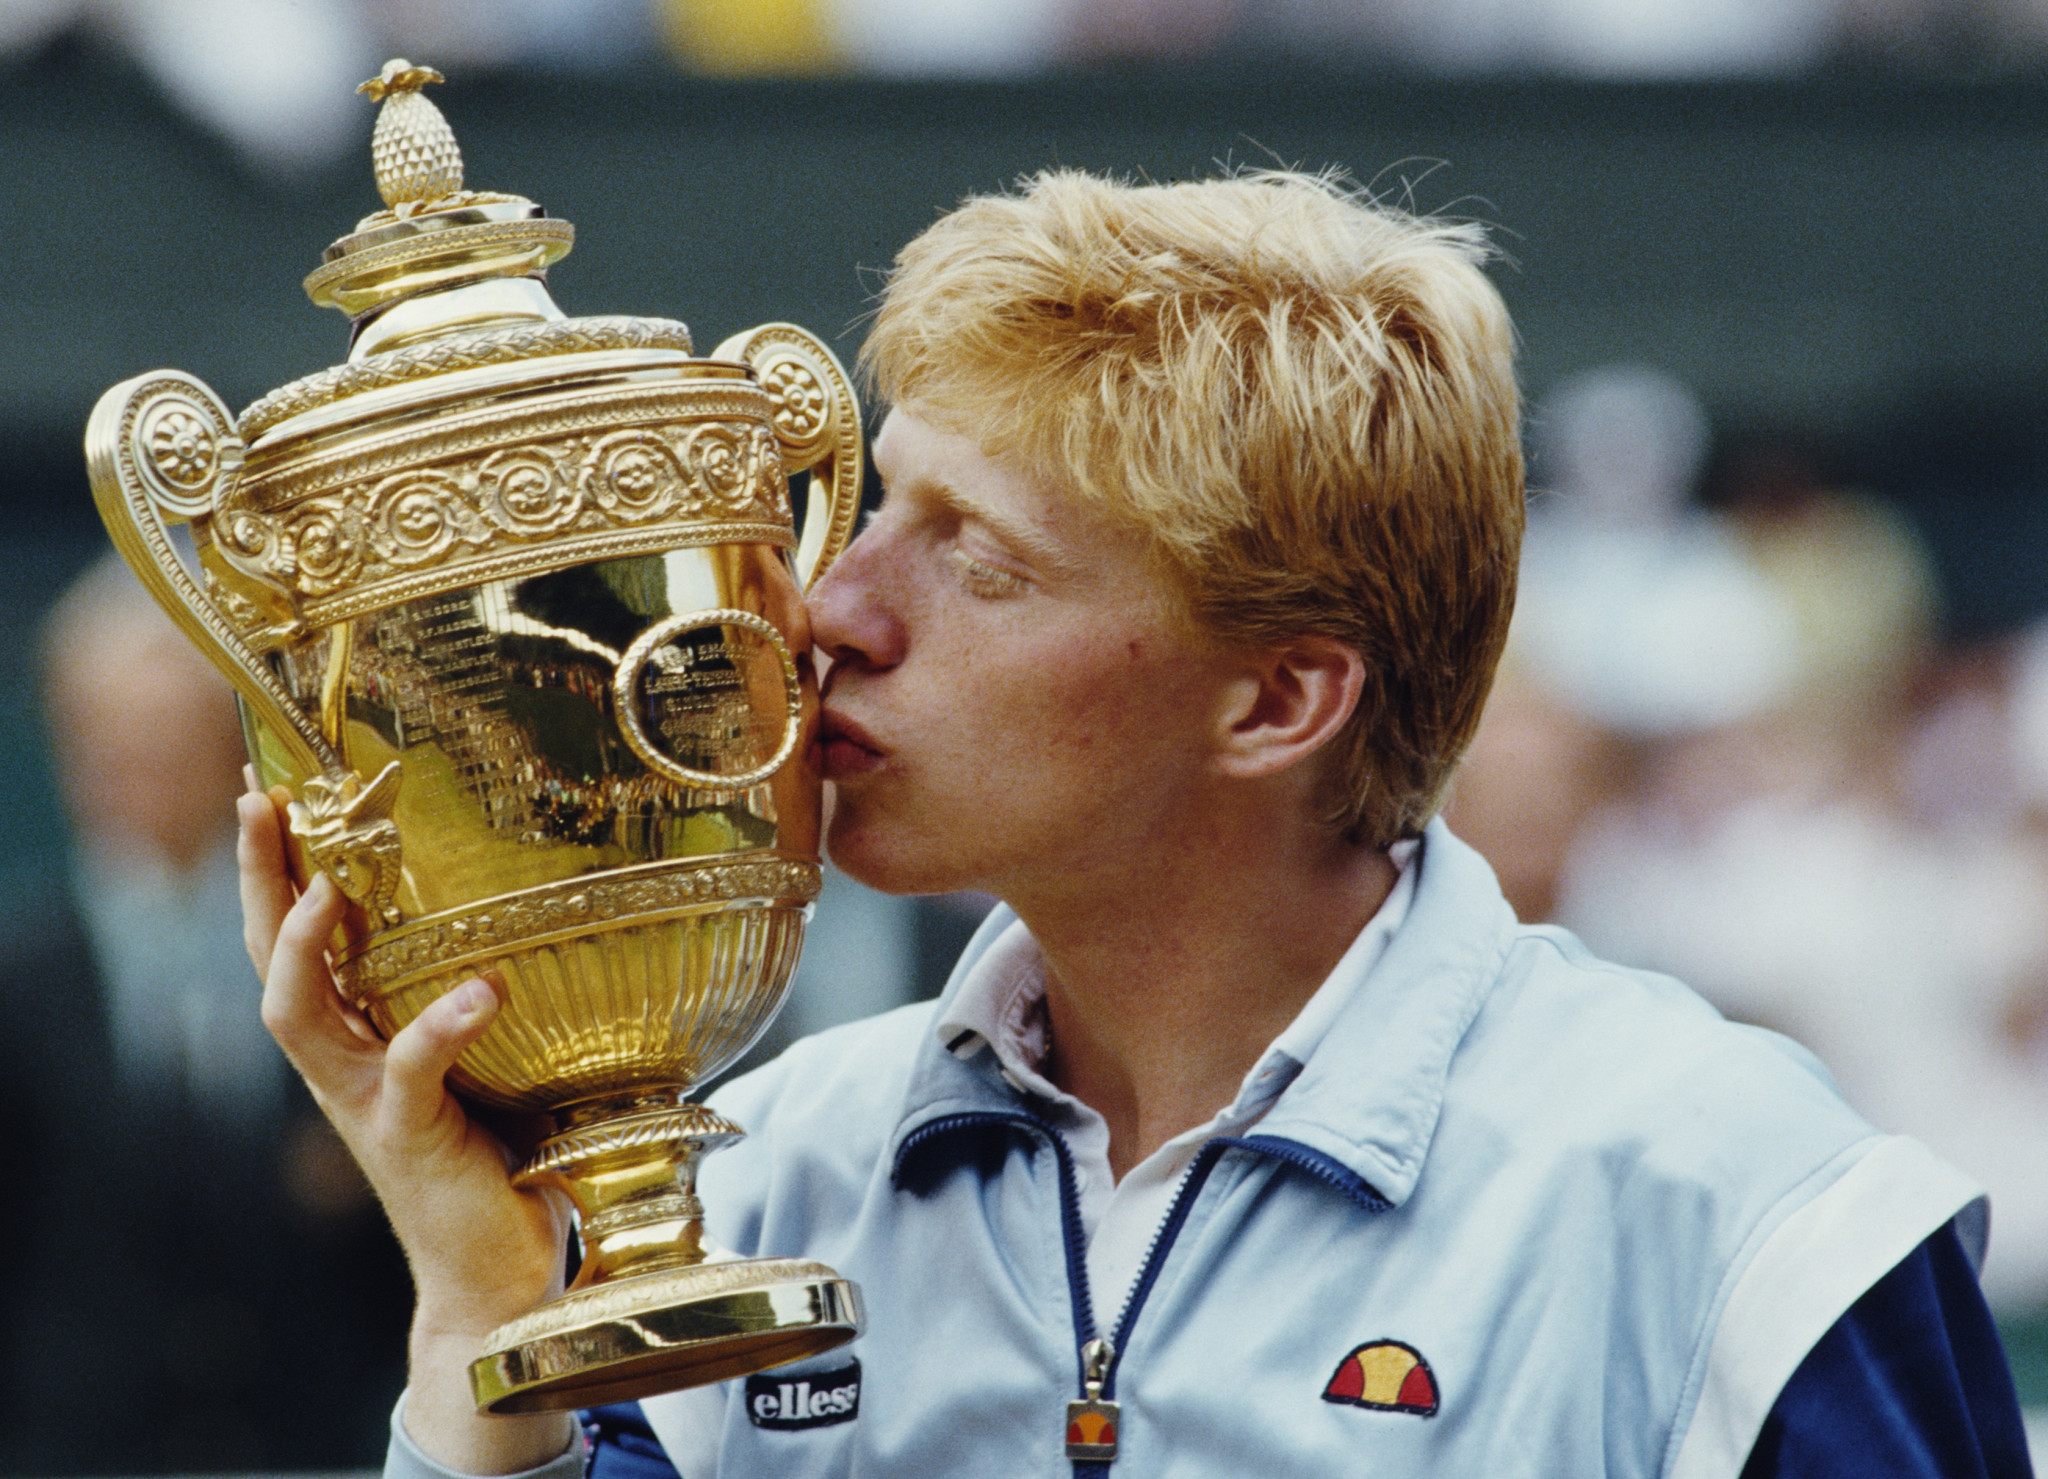 The 1985 Wimbledon men's singles title that Boris Becker won as an 17-year-old is believed to be one of the trophies that he failed to hand over ©Getty Images